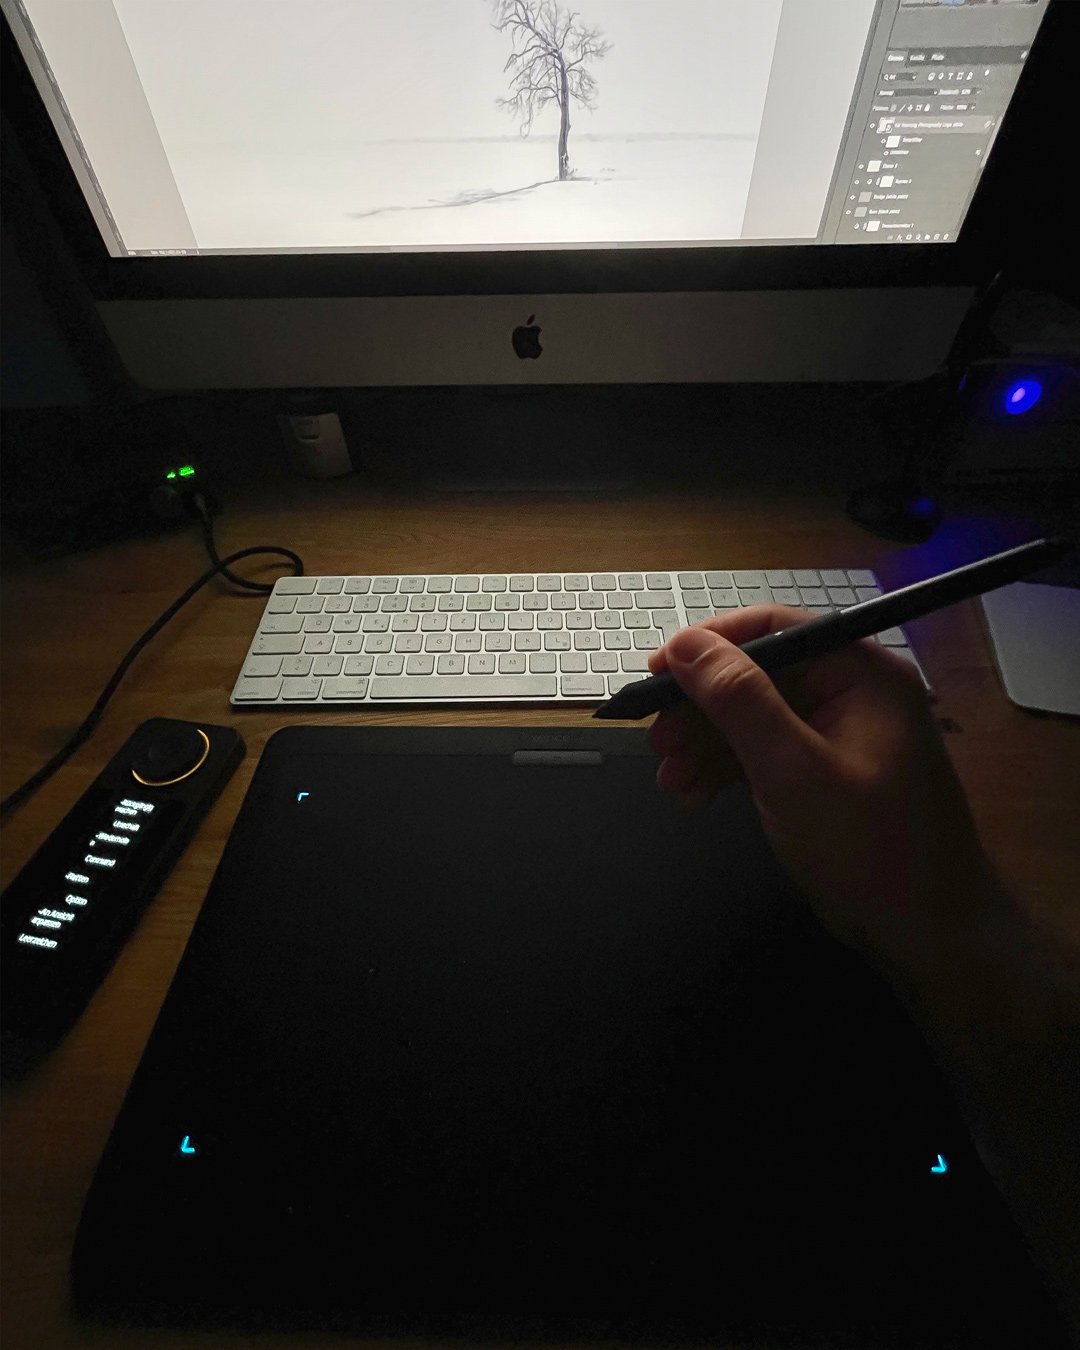 Xencelabs Graphic Tablet review: a great midrange tablet for artists